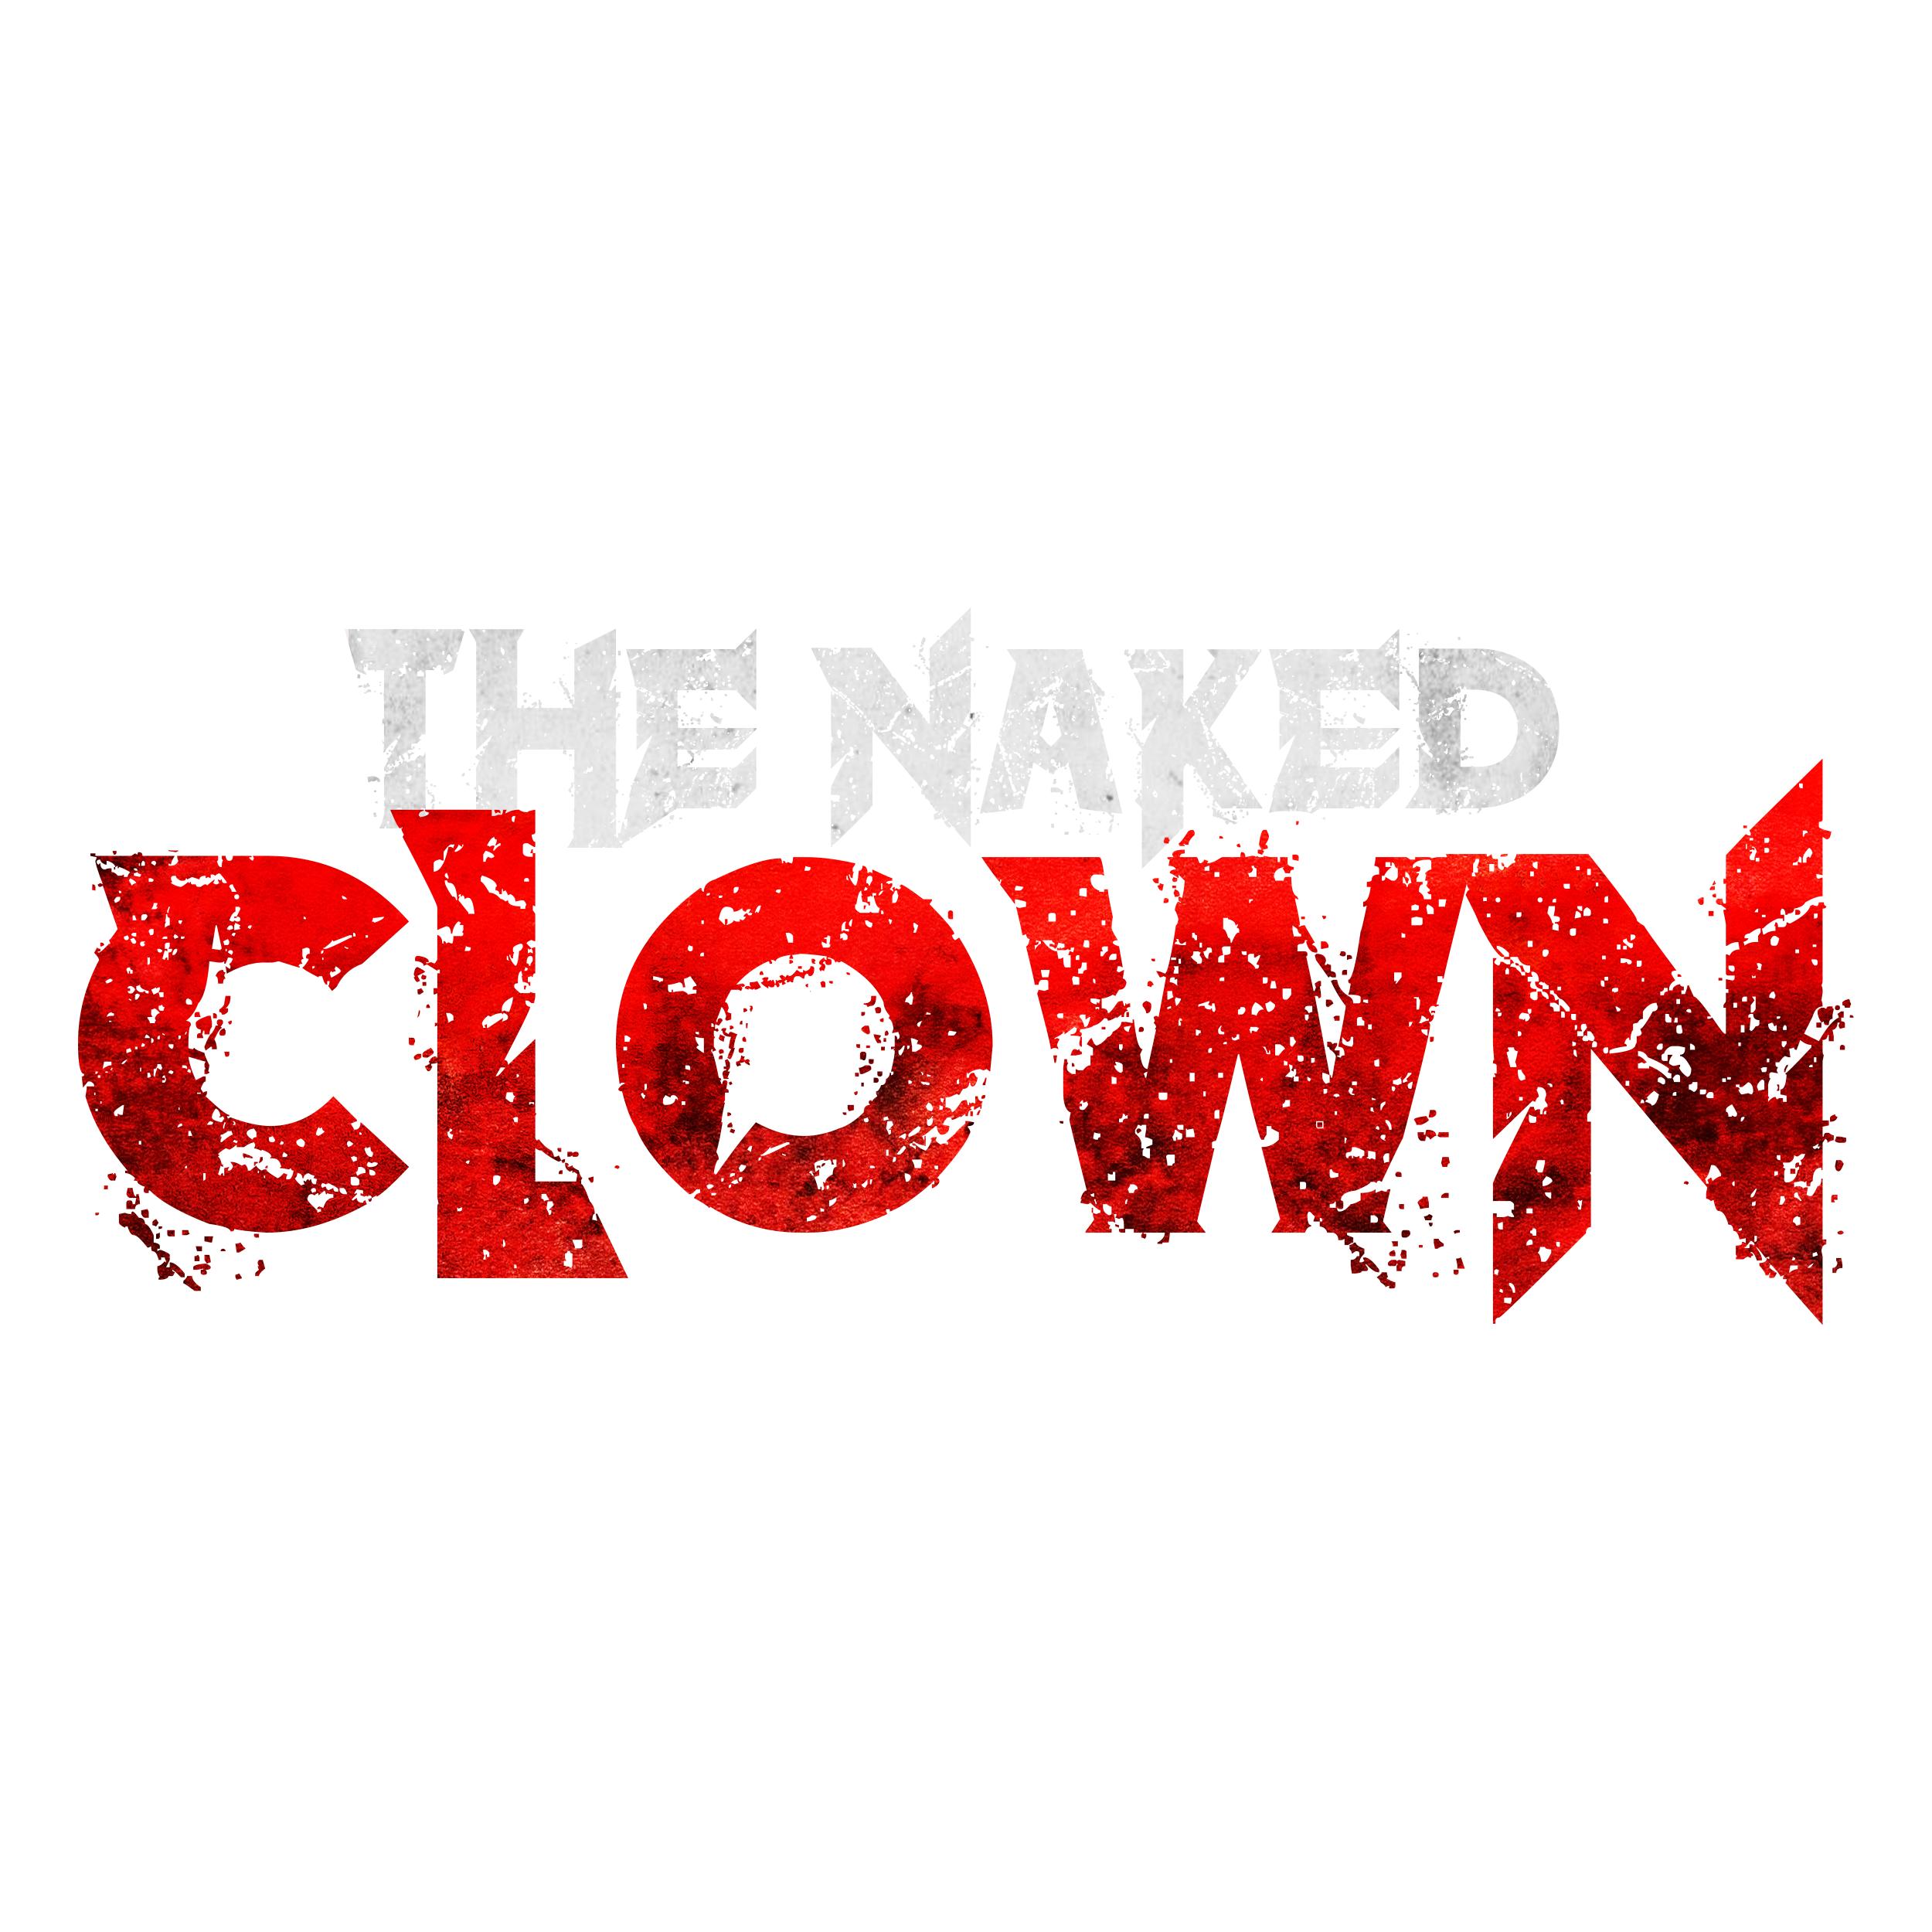 dj lufkins recommends naked clown pics pic